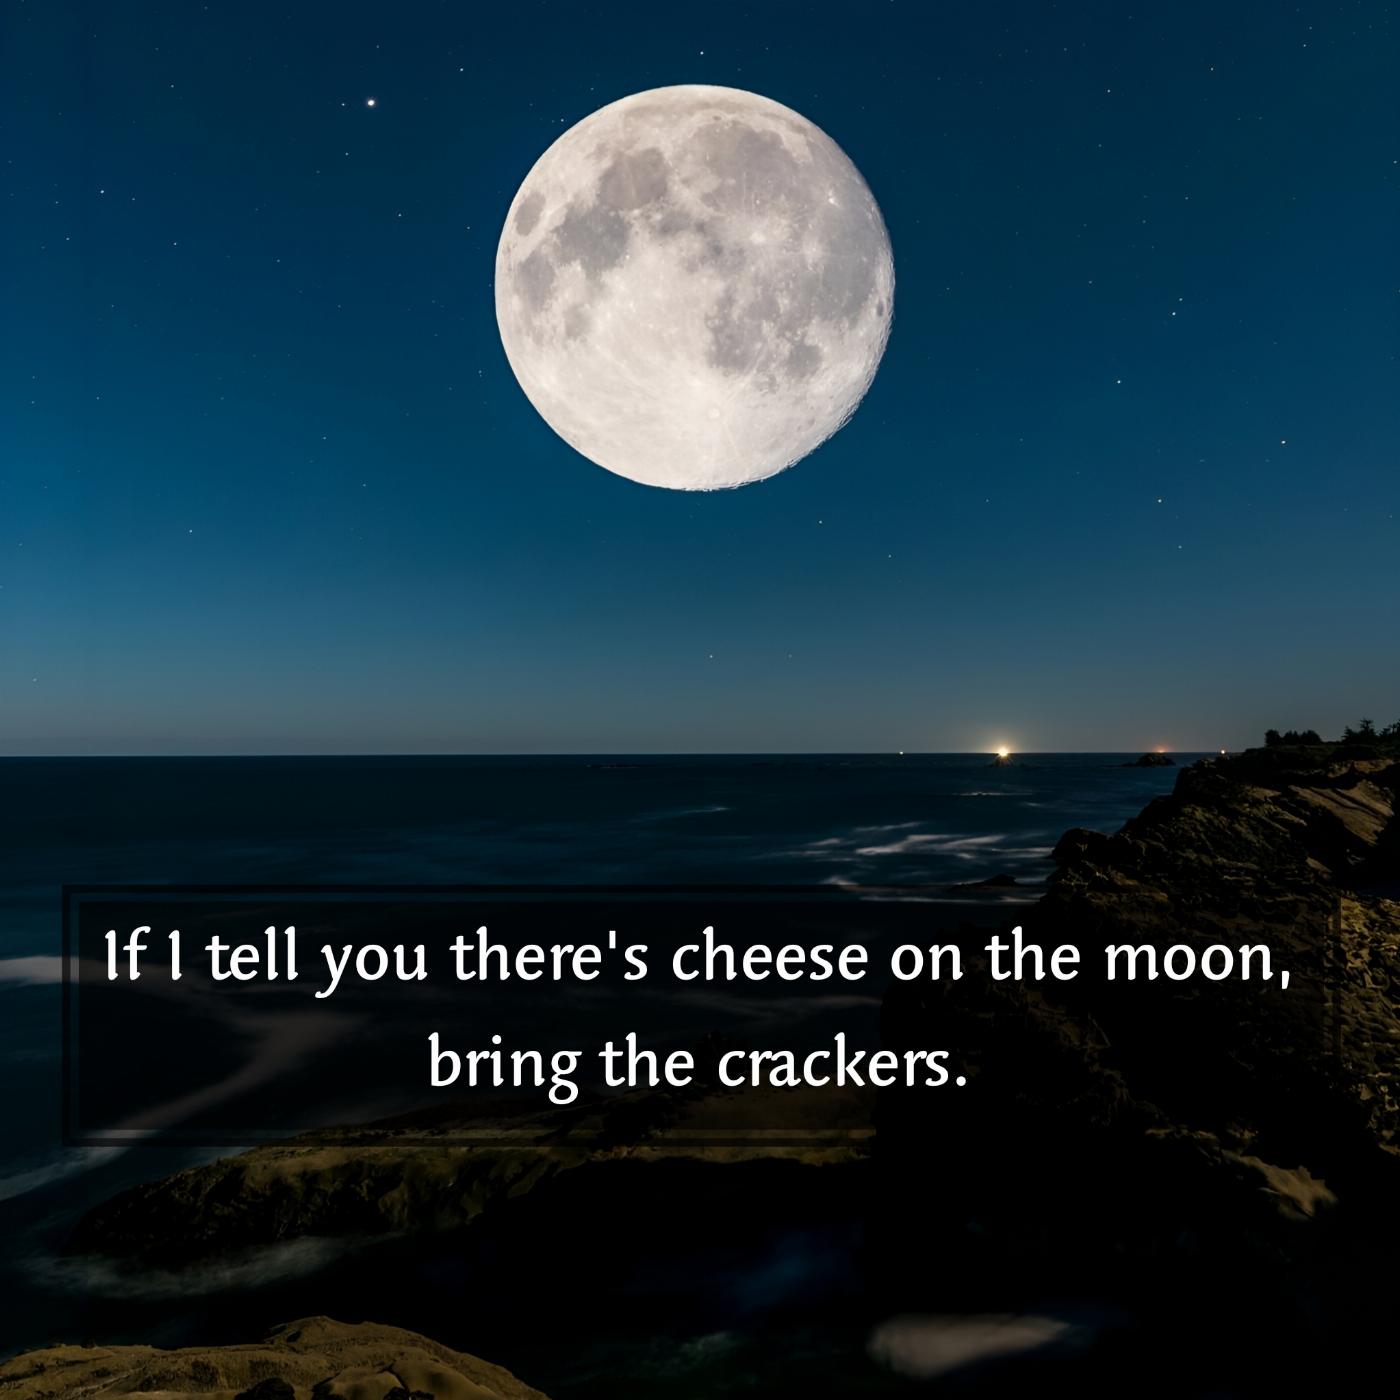 If I tell you there's cheese on the moon bring the crackers